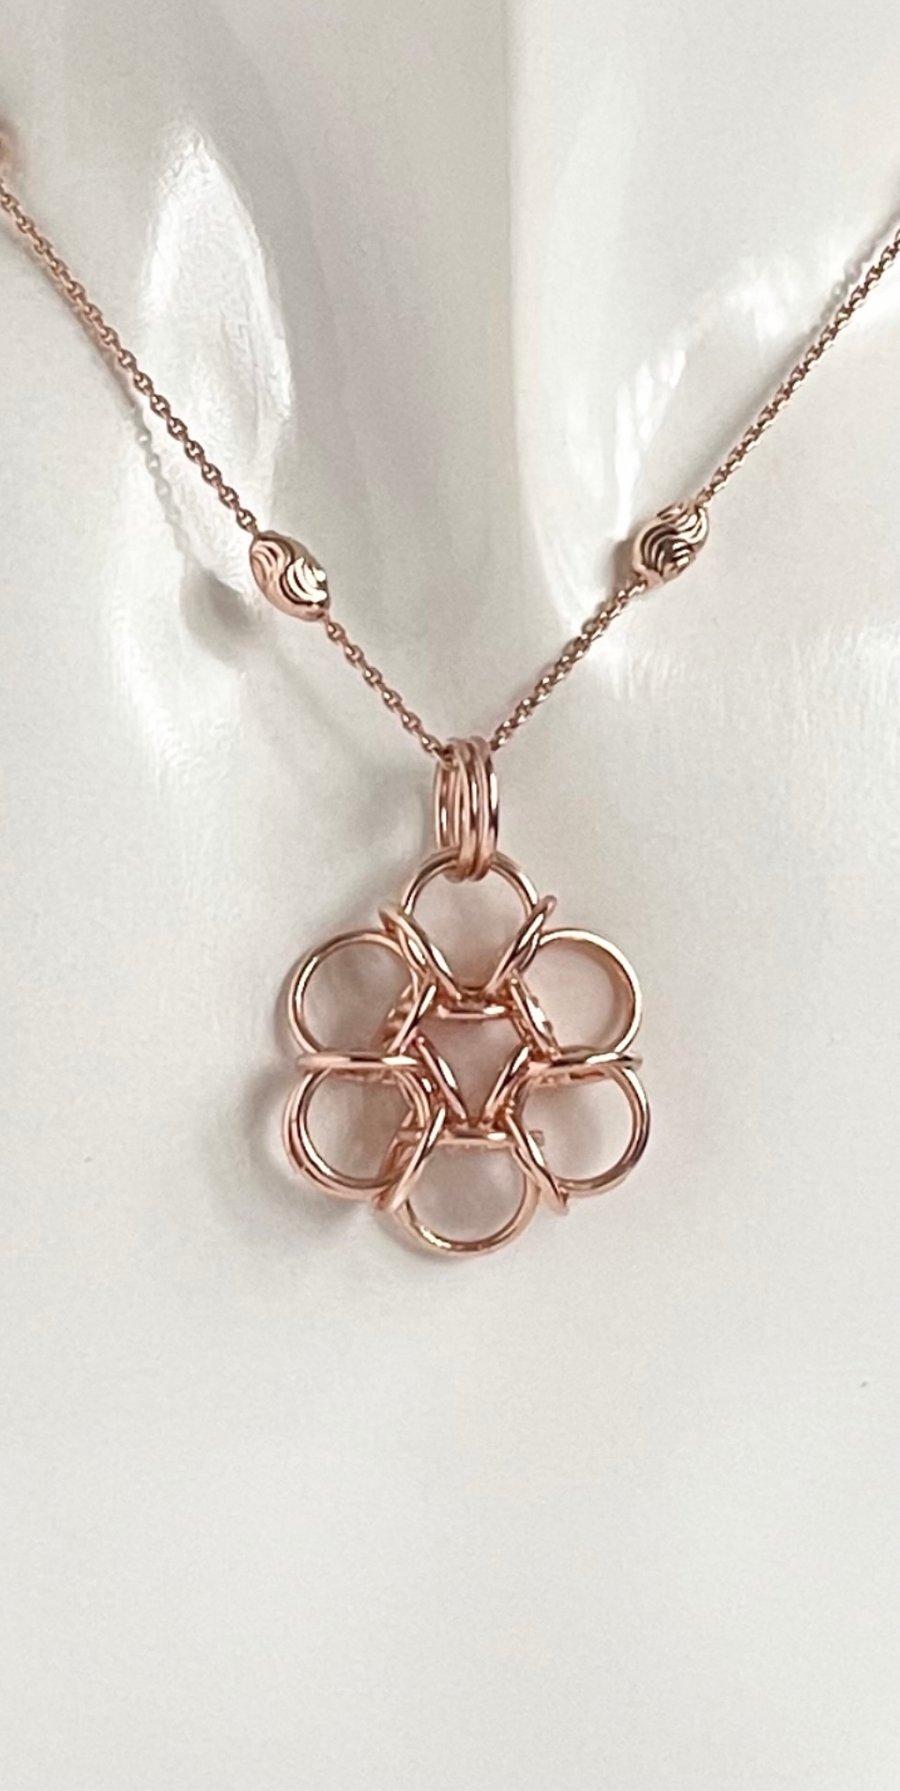 Rose Gold Sterling Silver Chainmaille Pendant and necklace “Last One Available”